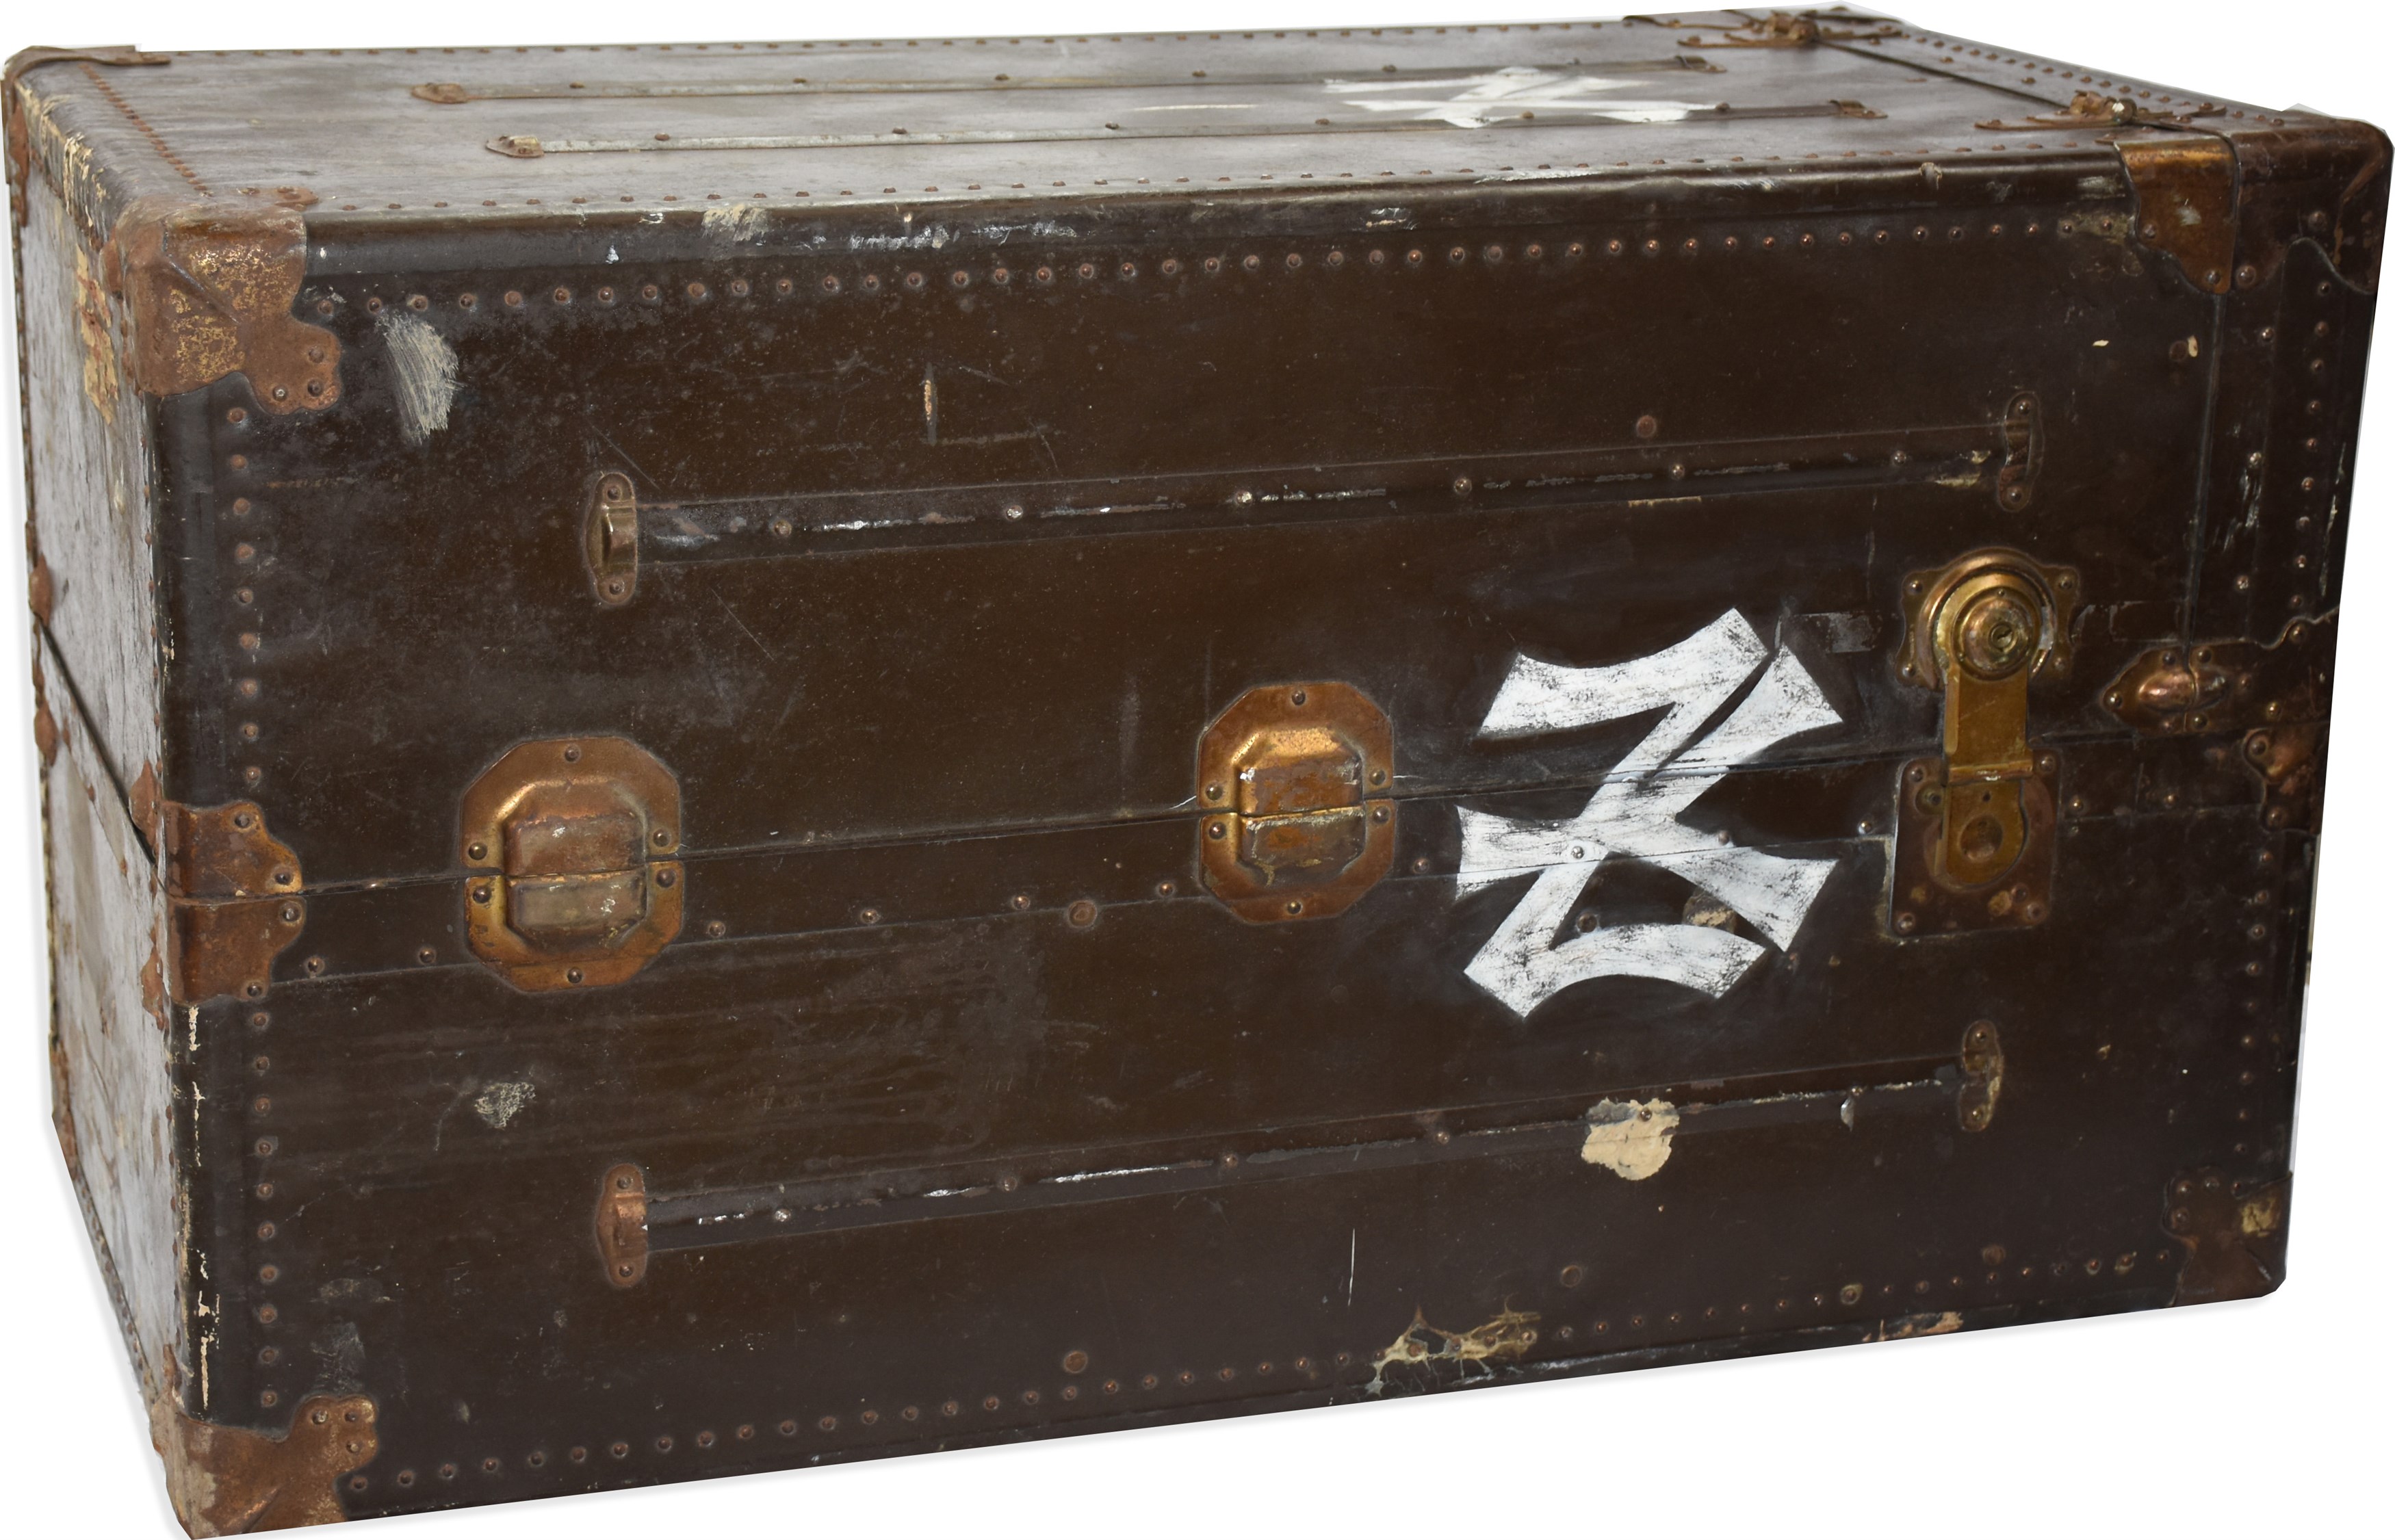 - 1920s-30s Earle Combs New York Yankees Traveling Steamer Trunk